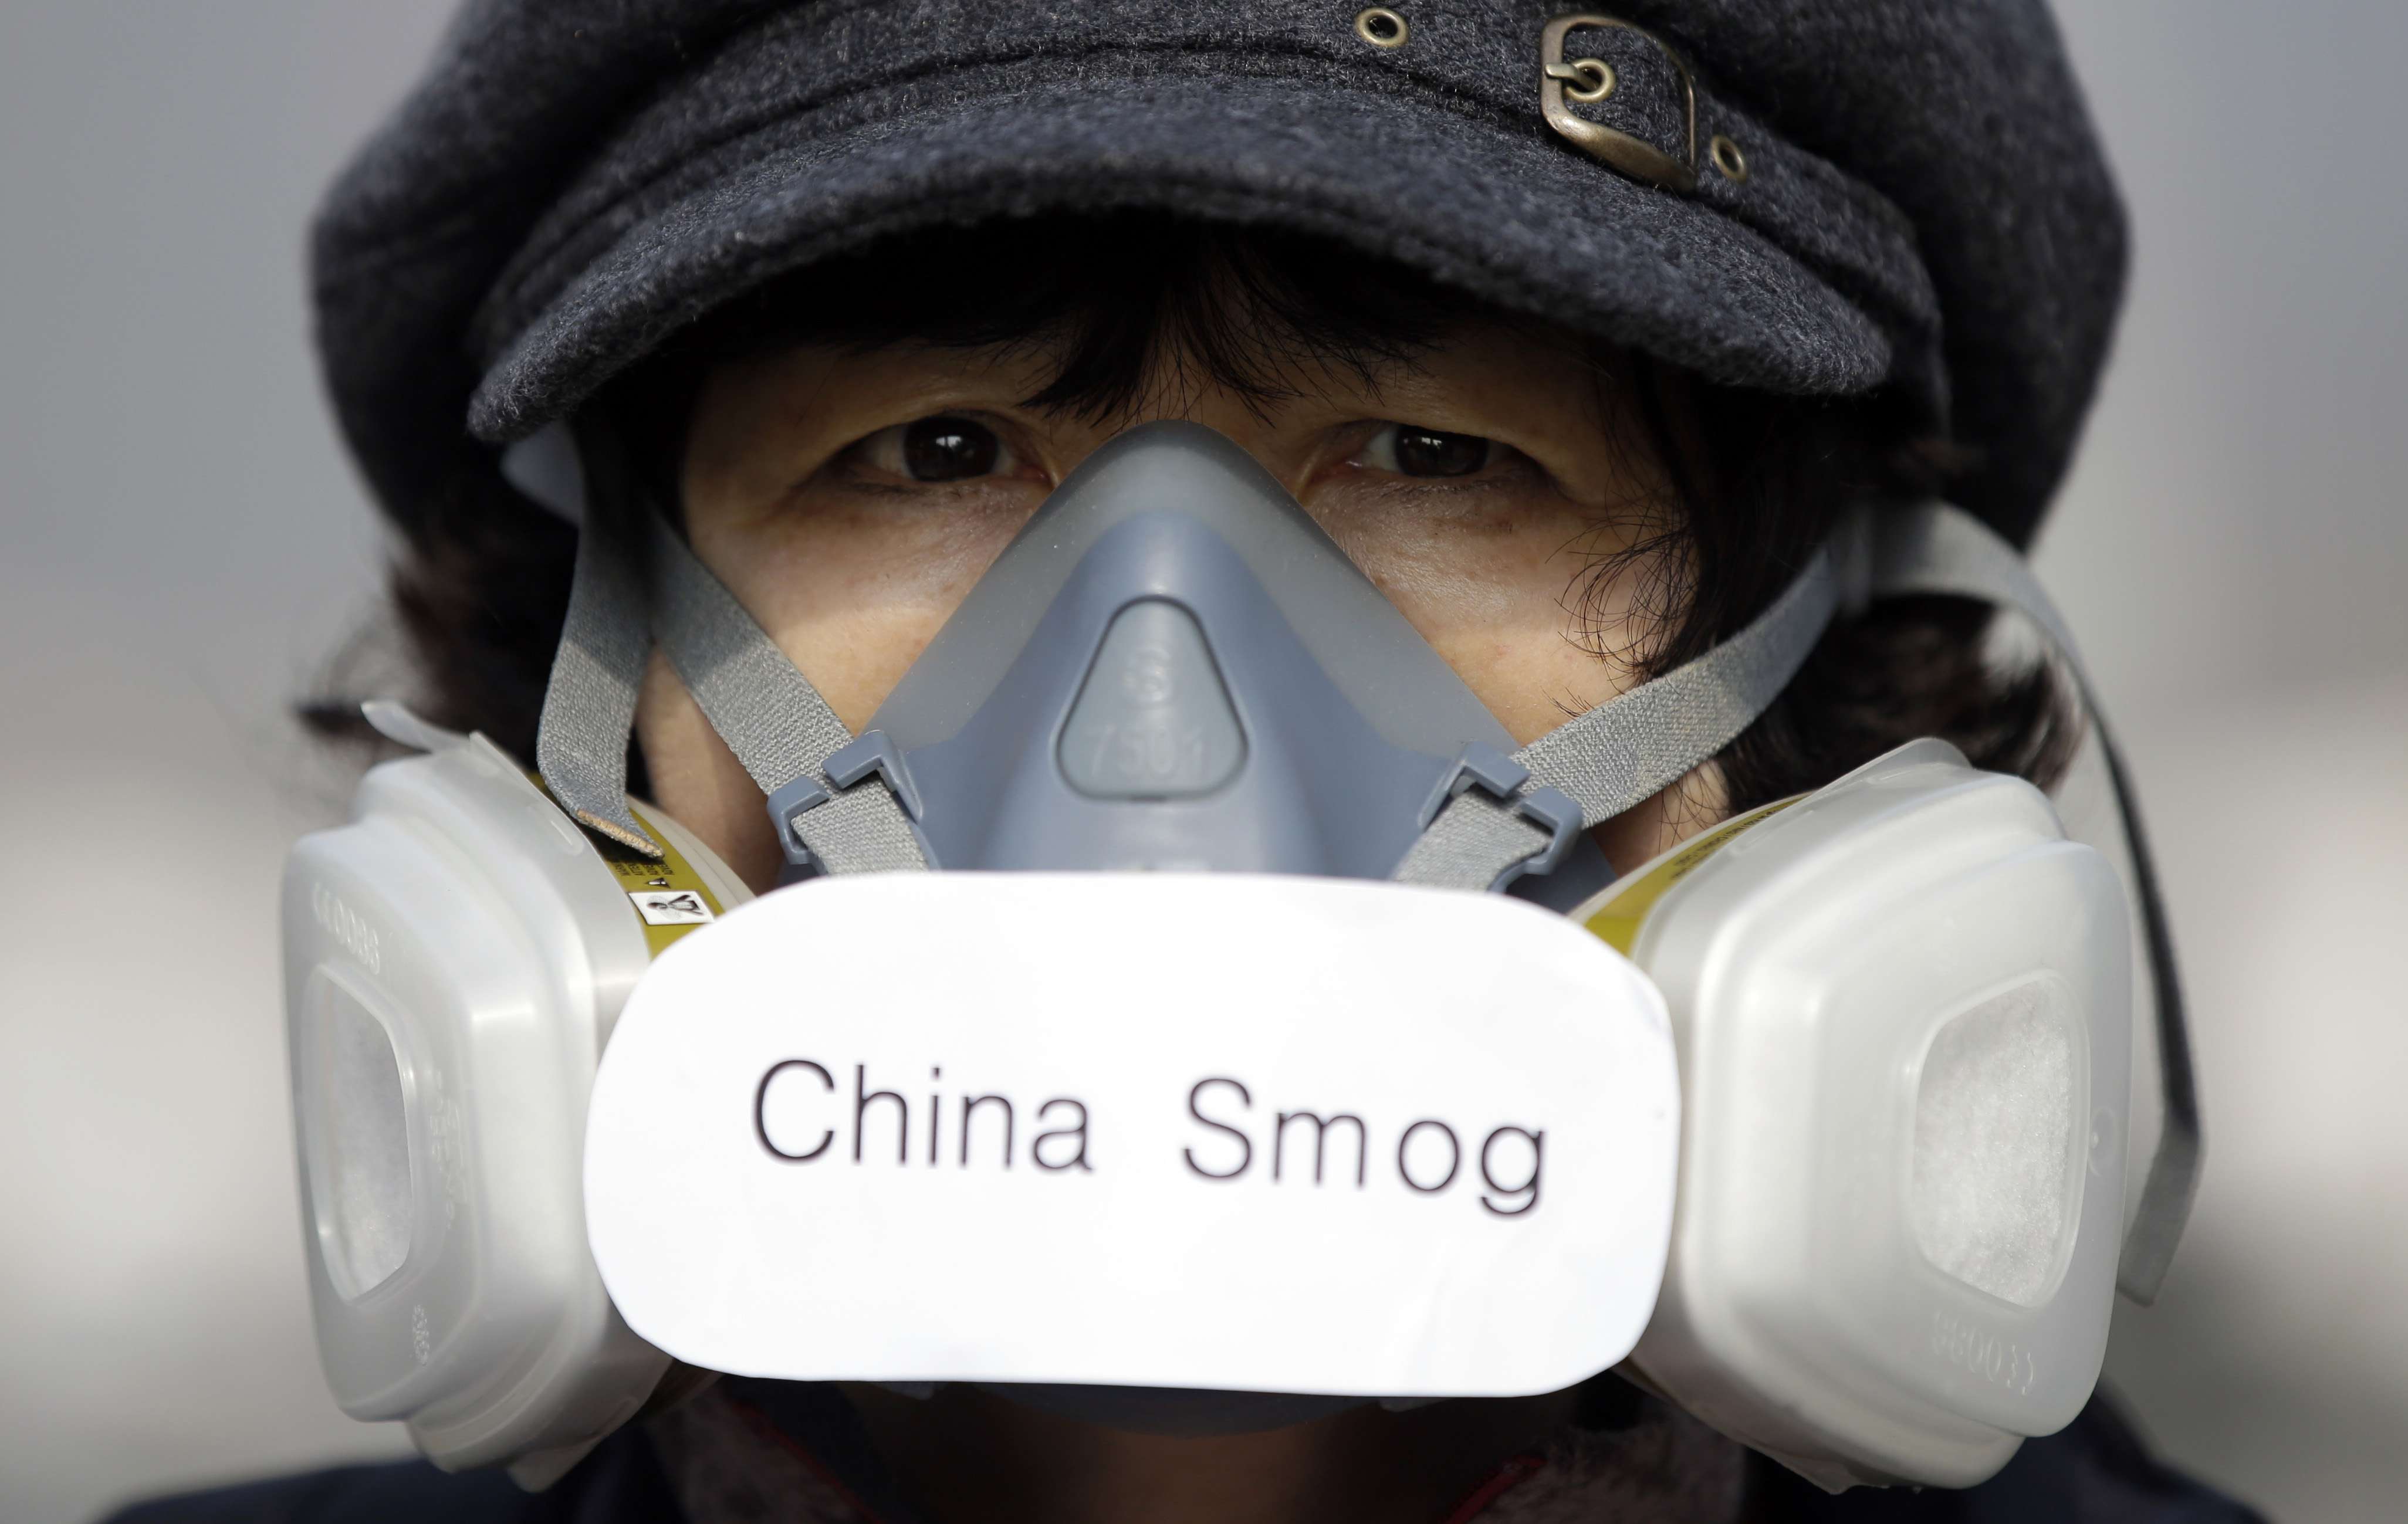 The South Korean government has long blamed Beijing for its pollution issues. But with more coal-fired power plants being built, it’s time for the country to look at its own actions. Photo: AP